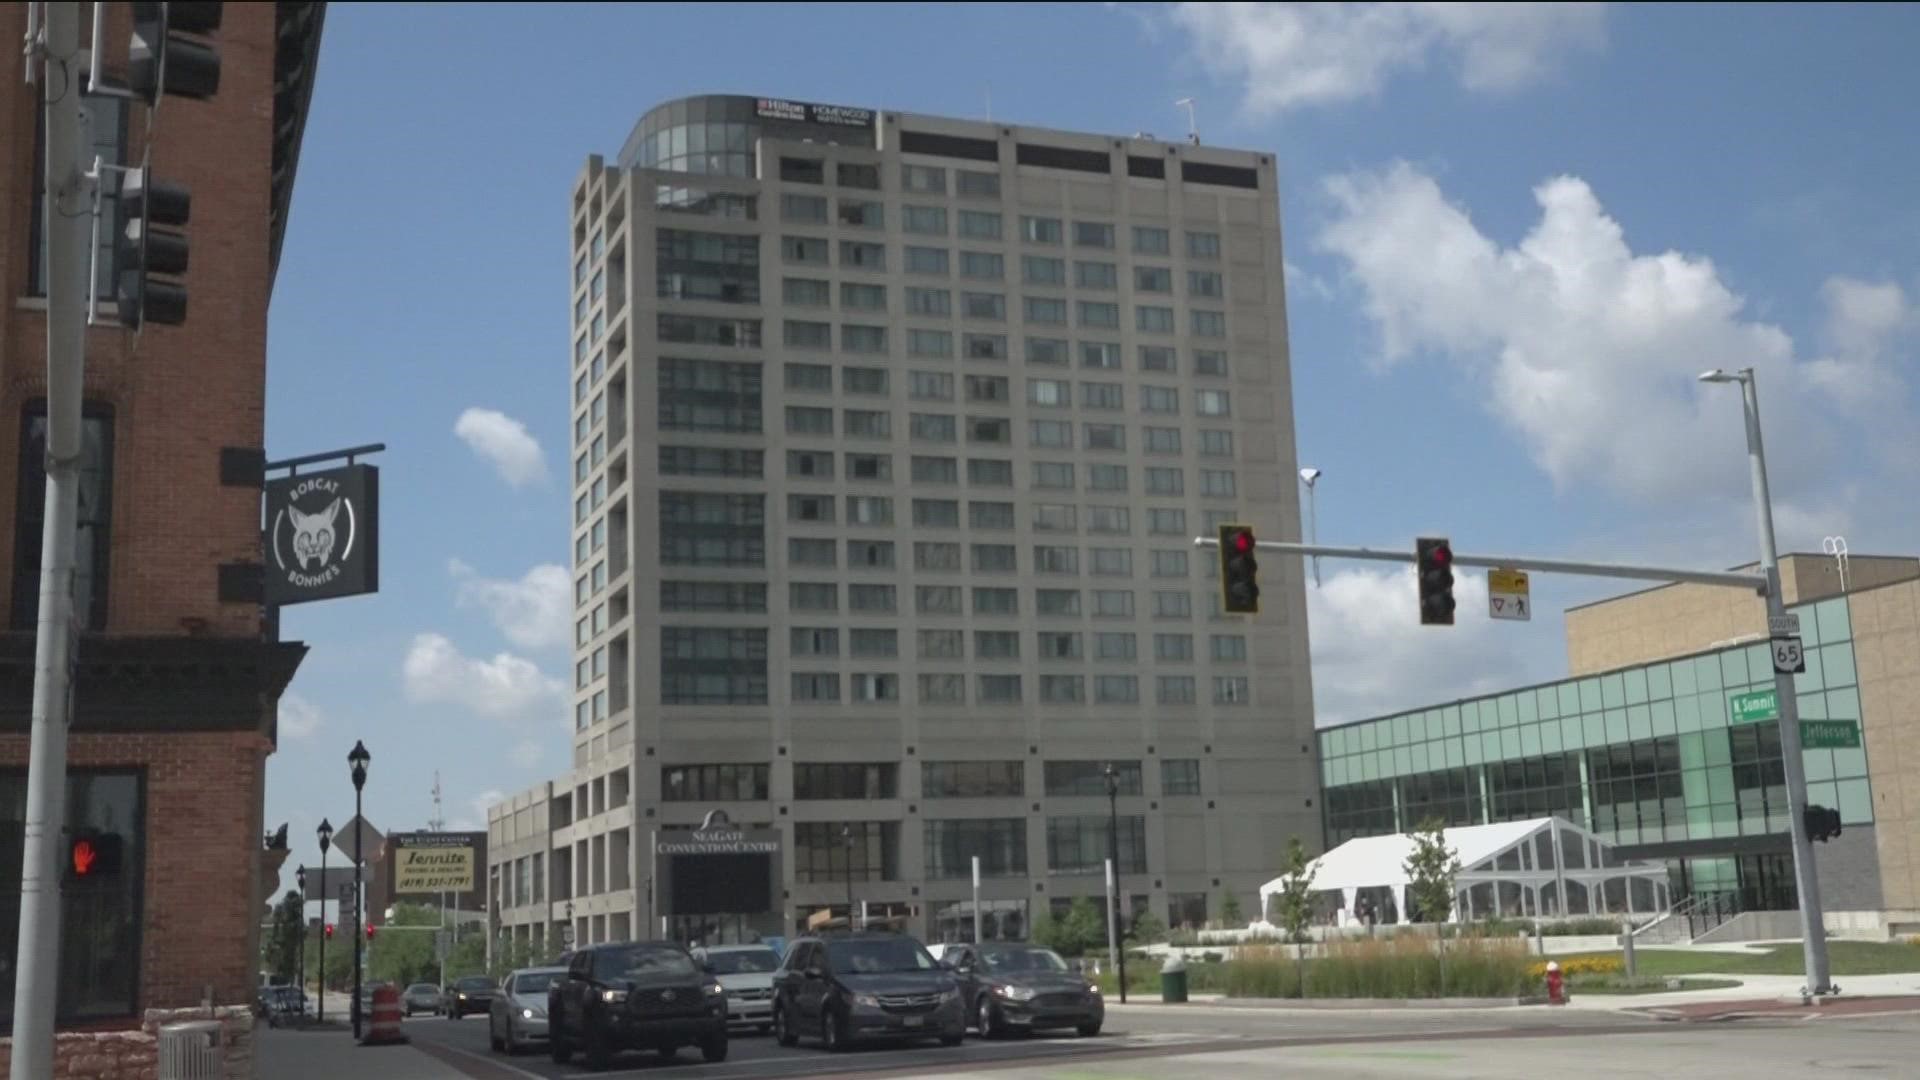 The official grand opening for the Hilton Garden Inn and Homewood Suites is just one of several recent big projects for downtown Toledo.